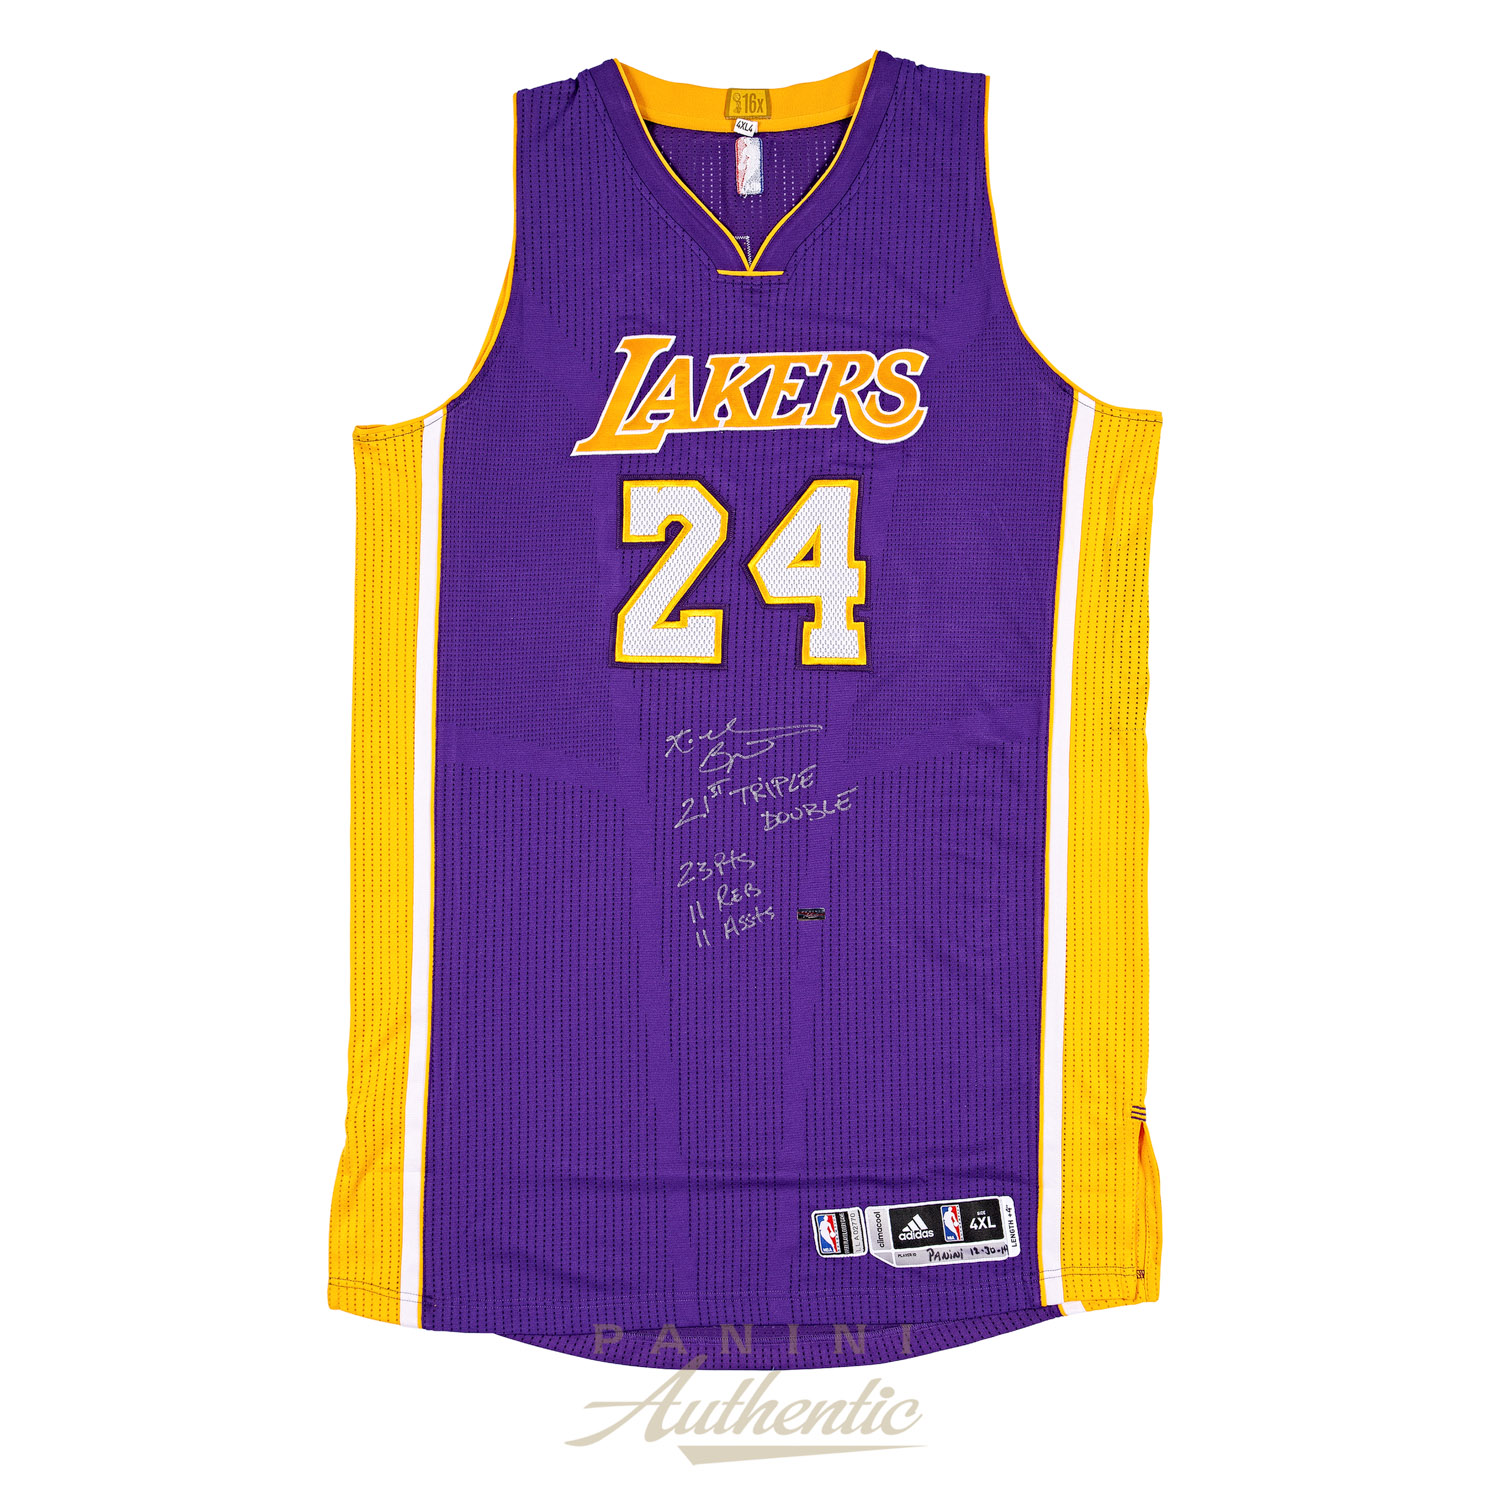 kobe bryant jersey with sleeves